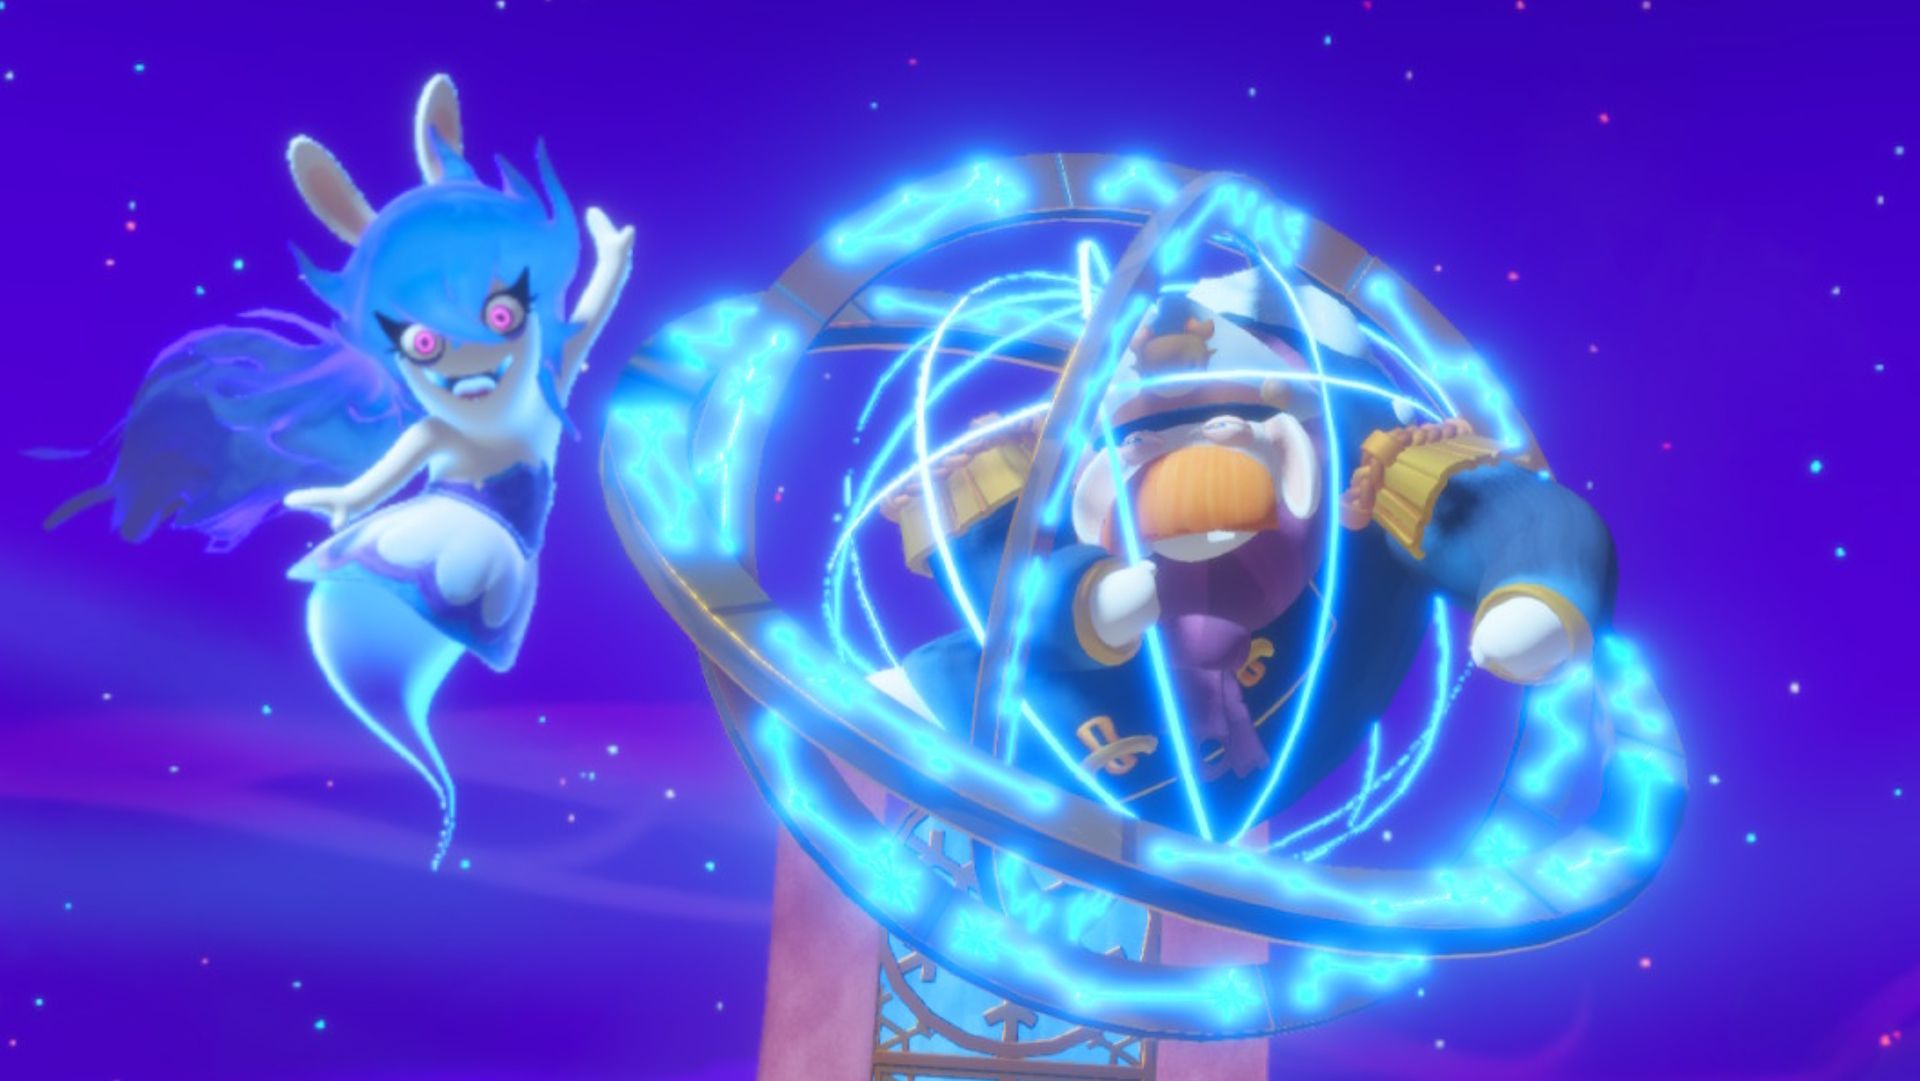 Mario + Rabbids Sparks of Hope is supercharged with new tactical features